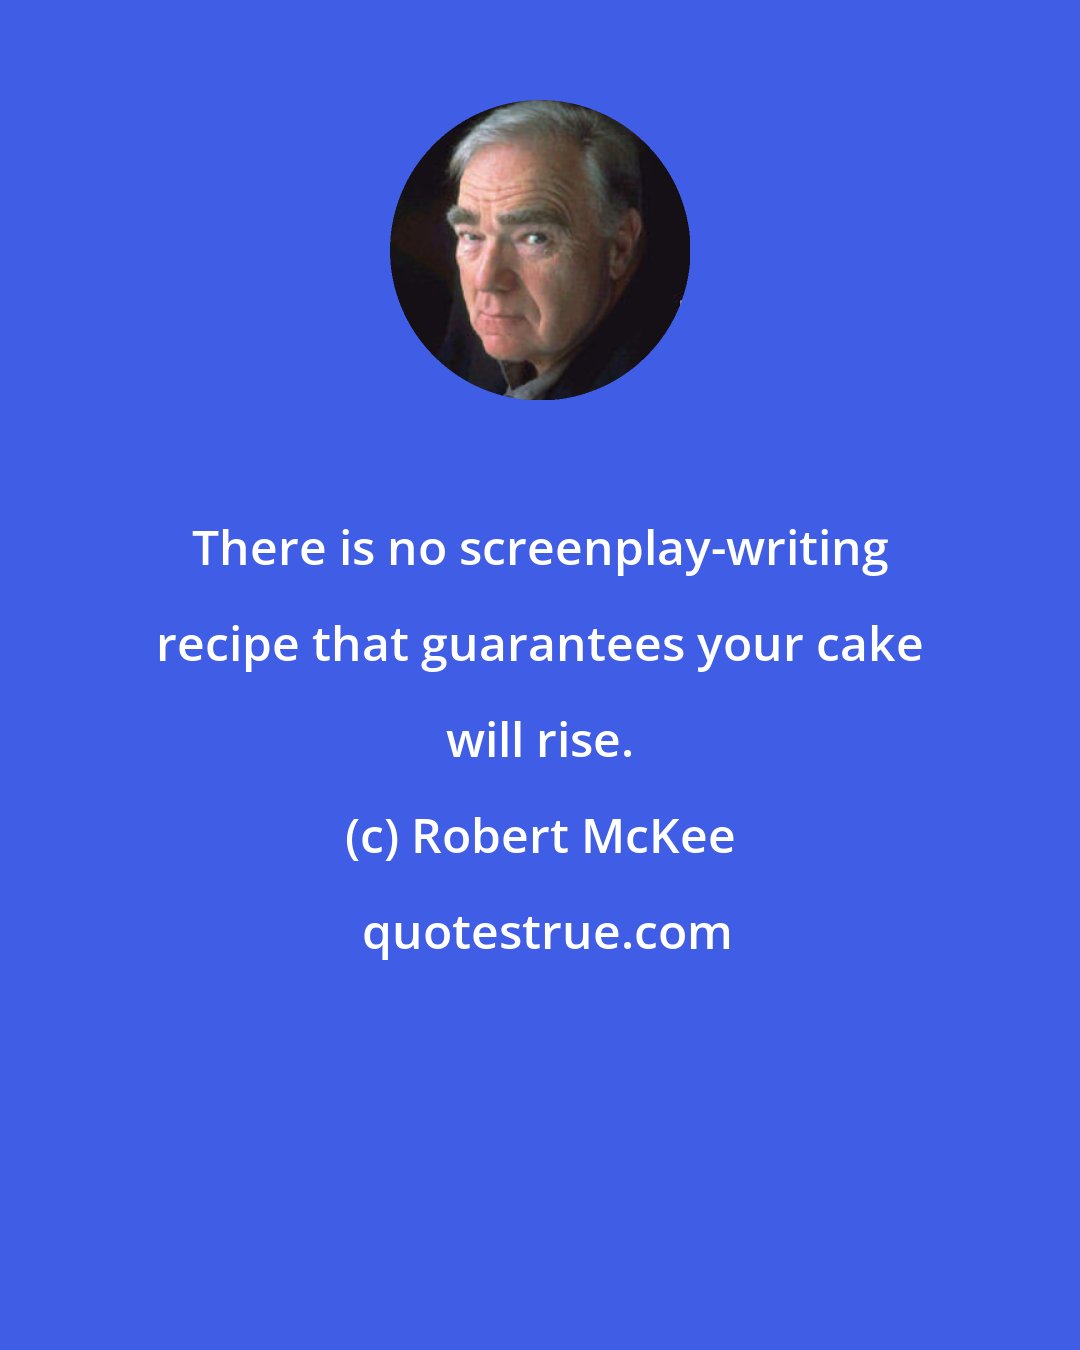 Robert McKee: There is no screenplay-writing recipe that guarantees your cake will rise.